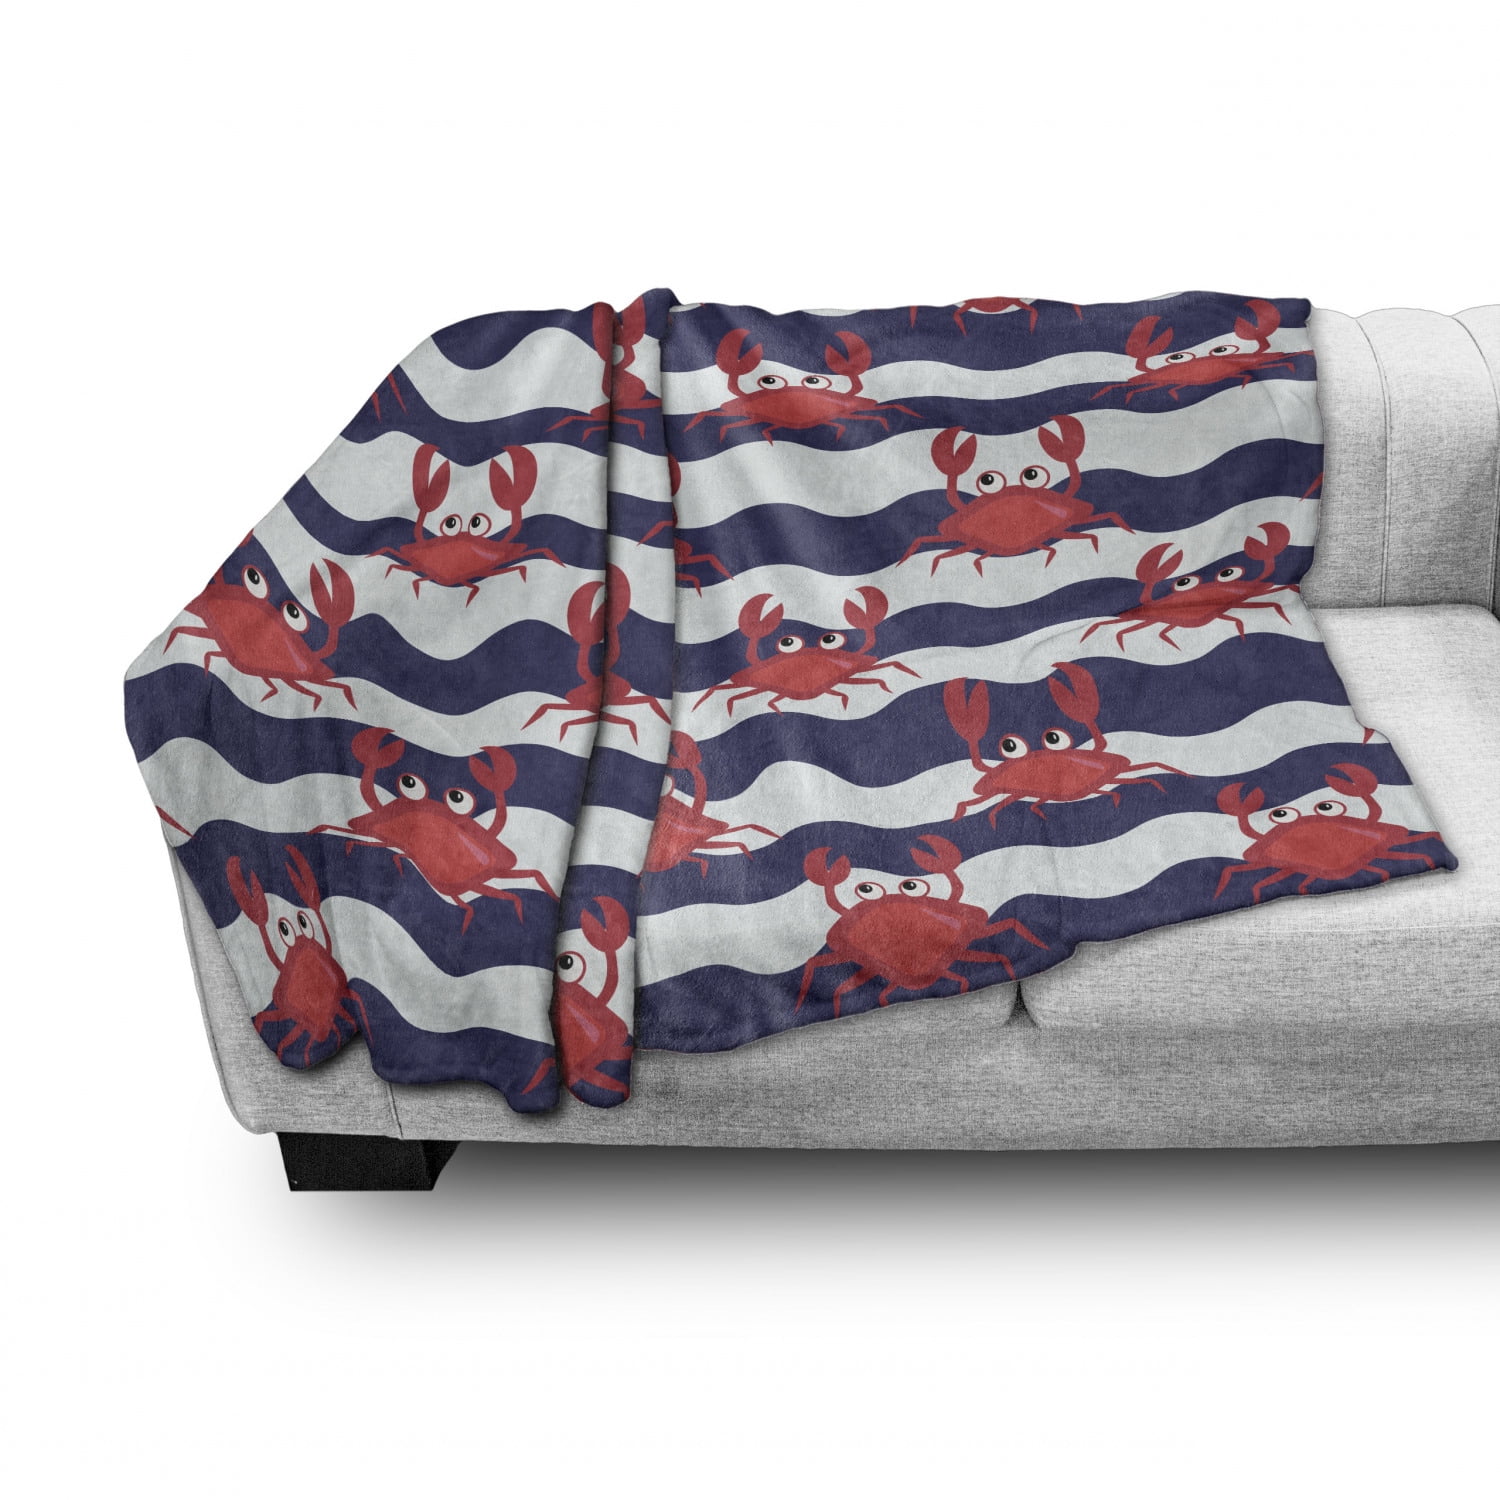 Crabs Soft Flannel Fleece Throw Blanket, Nautical Maritime Theme Crabs on  Striped Background Illustration Print, Cozy Plush for Indoor and Outdoor 